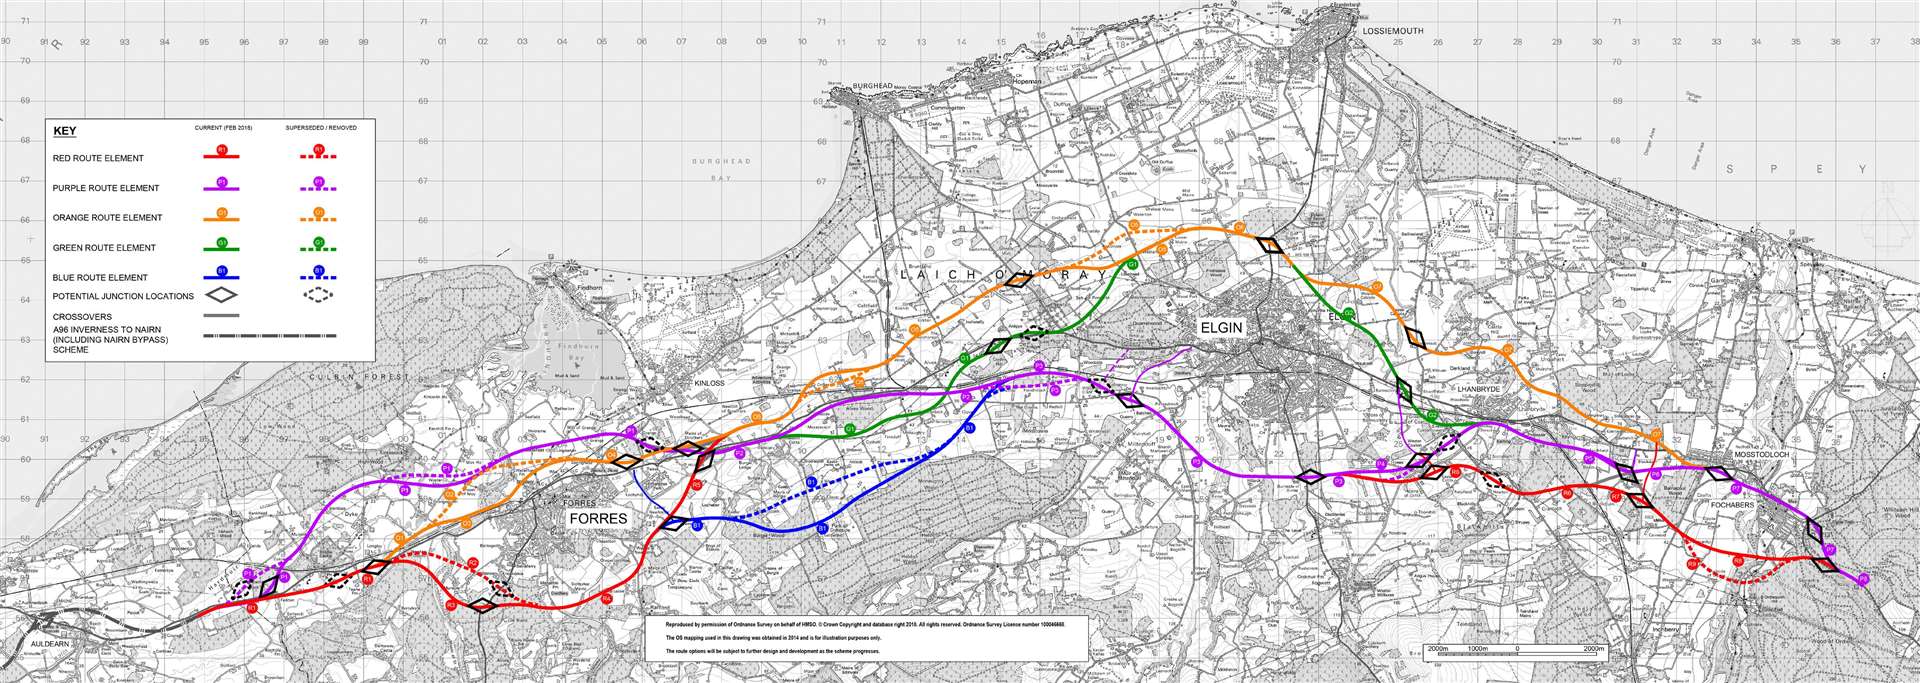 Transport Scotland's original options for the A96 Hardmuir to Fochabers dialling scheme at Forres.